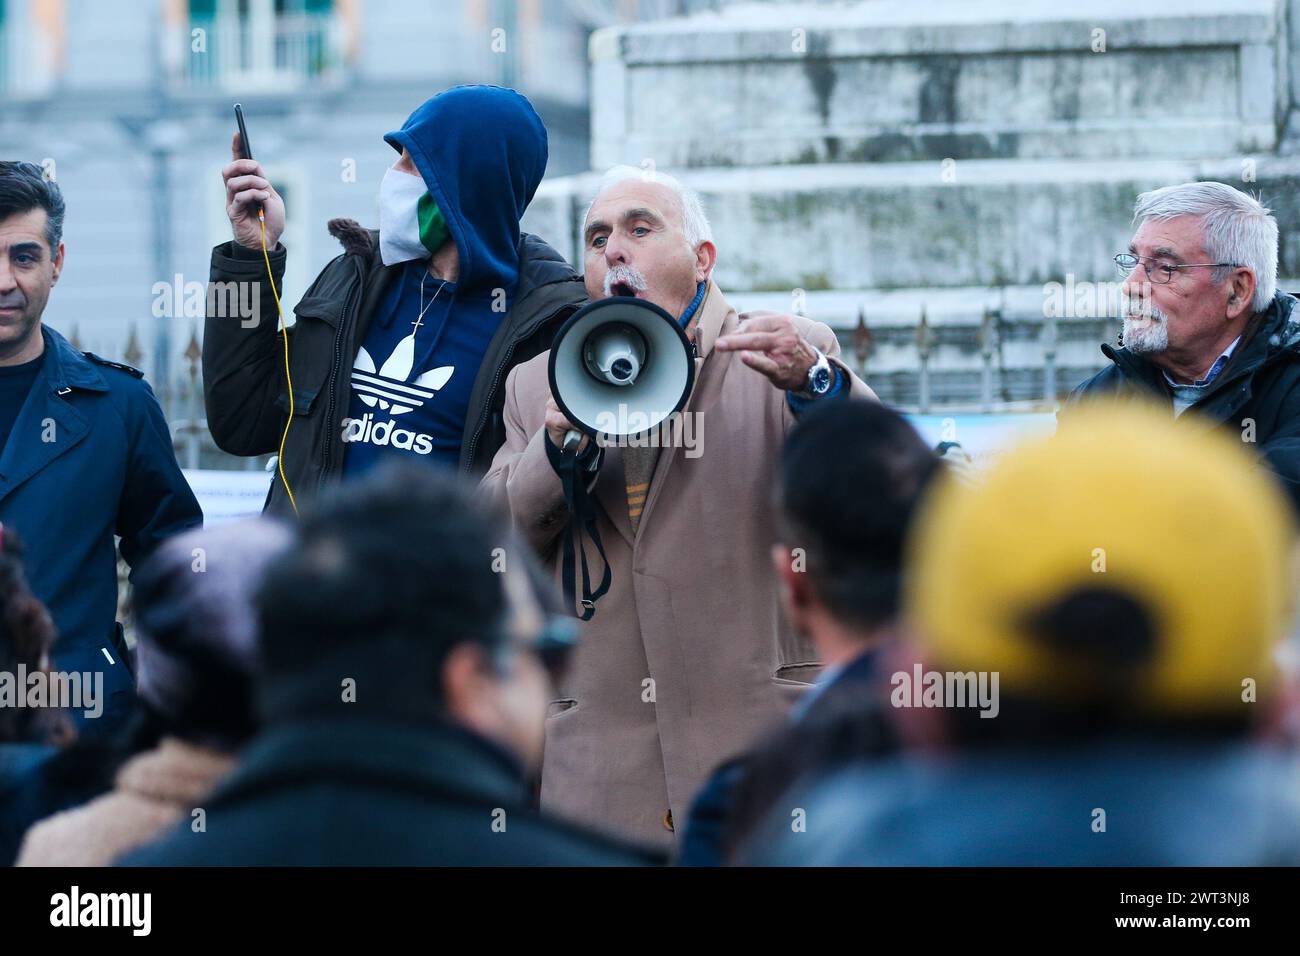 Former general Antonio Pappalardo, leader of the orange vests, speaks with a megaphone during the No Green Pass and No Vax demonstration in Naples. Stock Photo